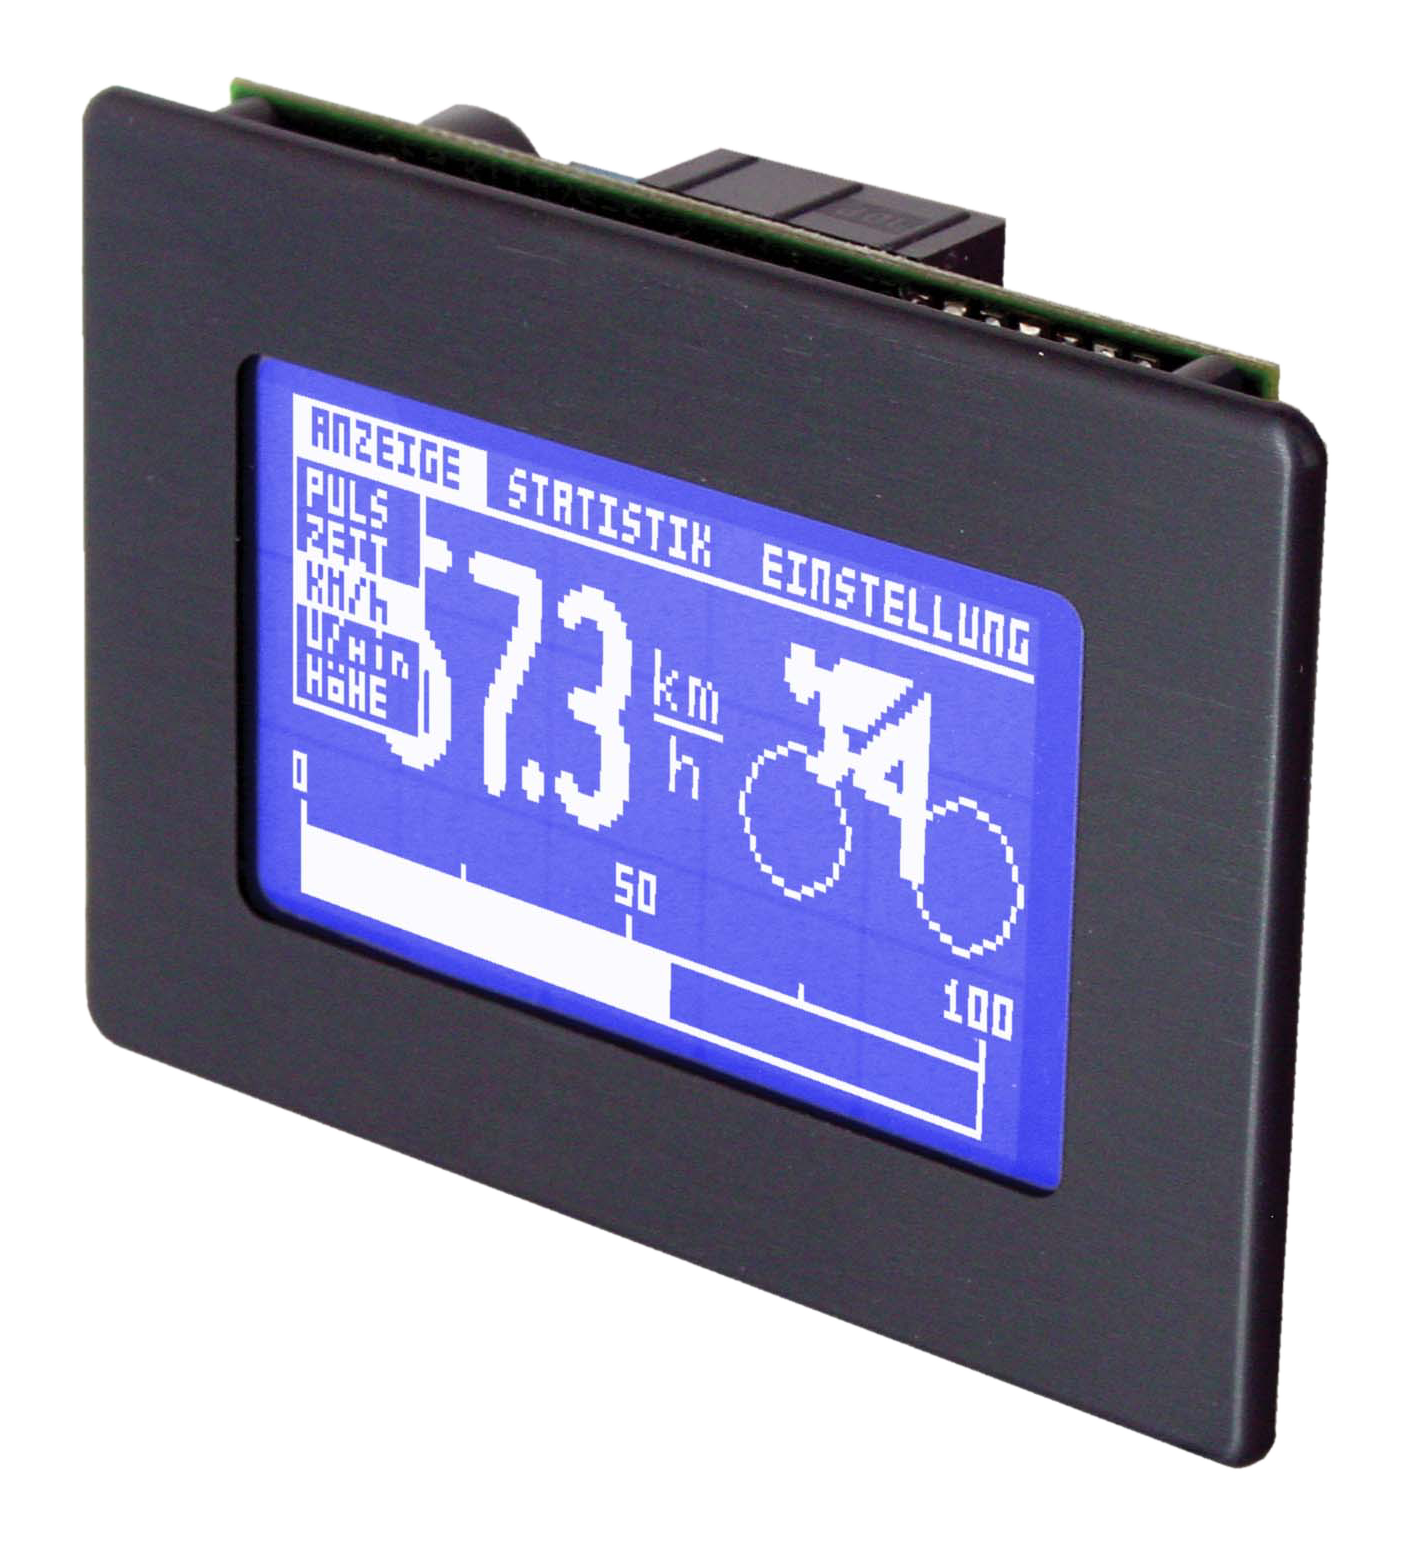 2.8" Serial HMI Graphic display with touch-screen